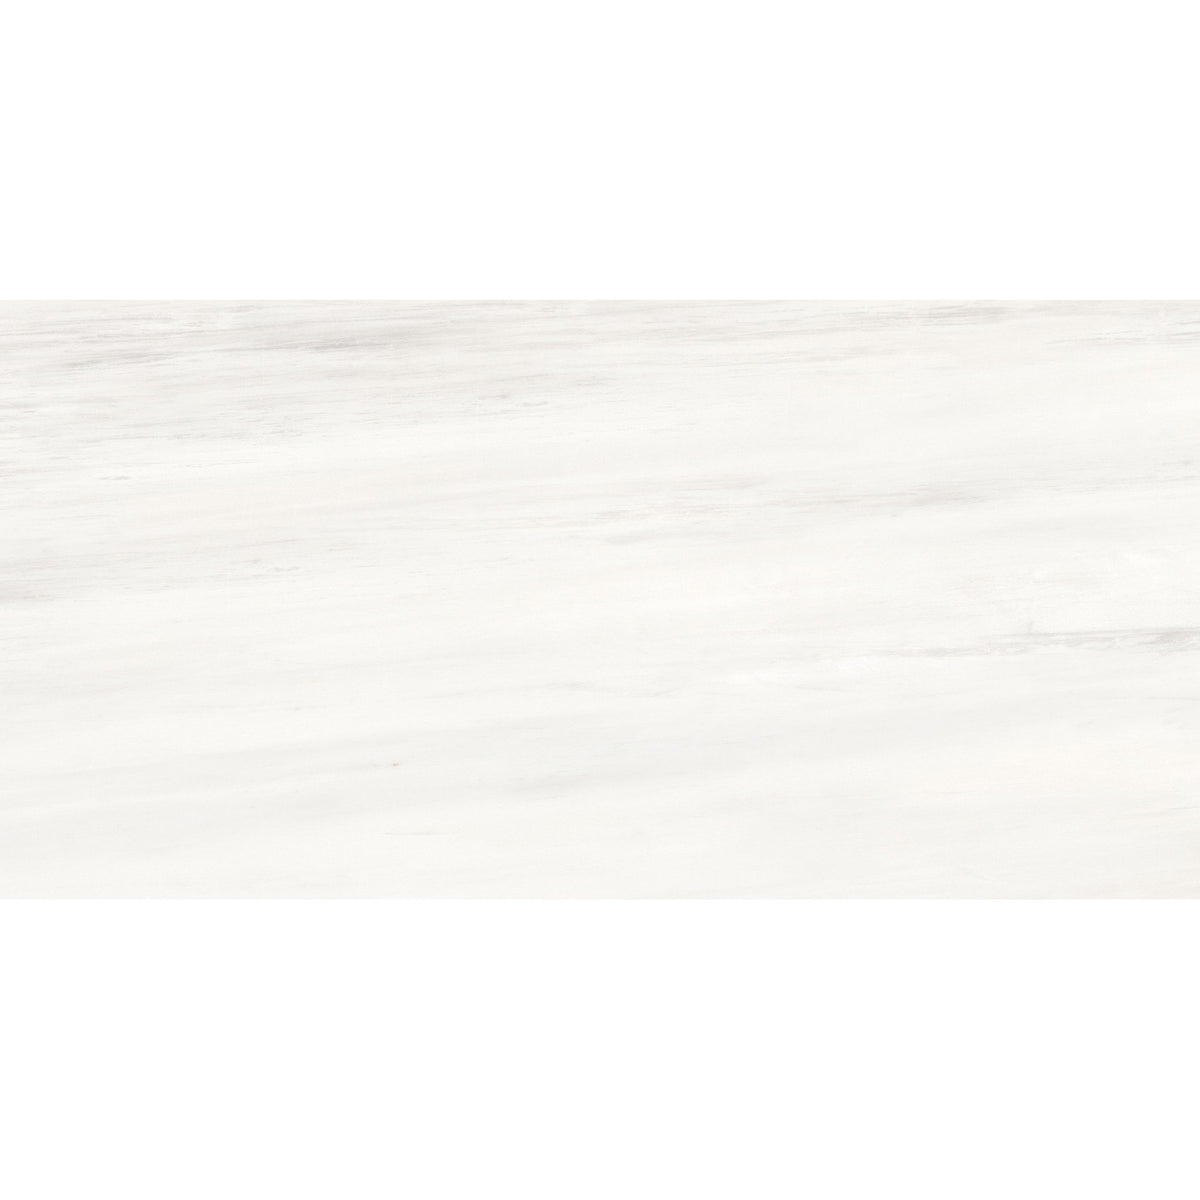 Anatolia Mayfair 12 in. x 24 in. HD Rectified Porcelain Tile - Suave Bianco (Polished)